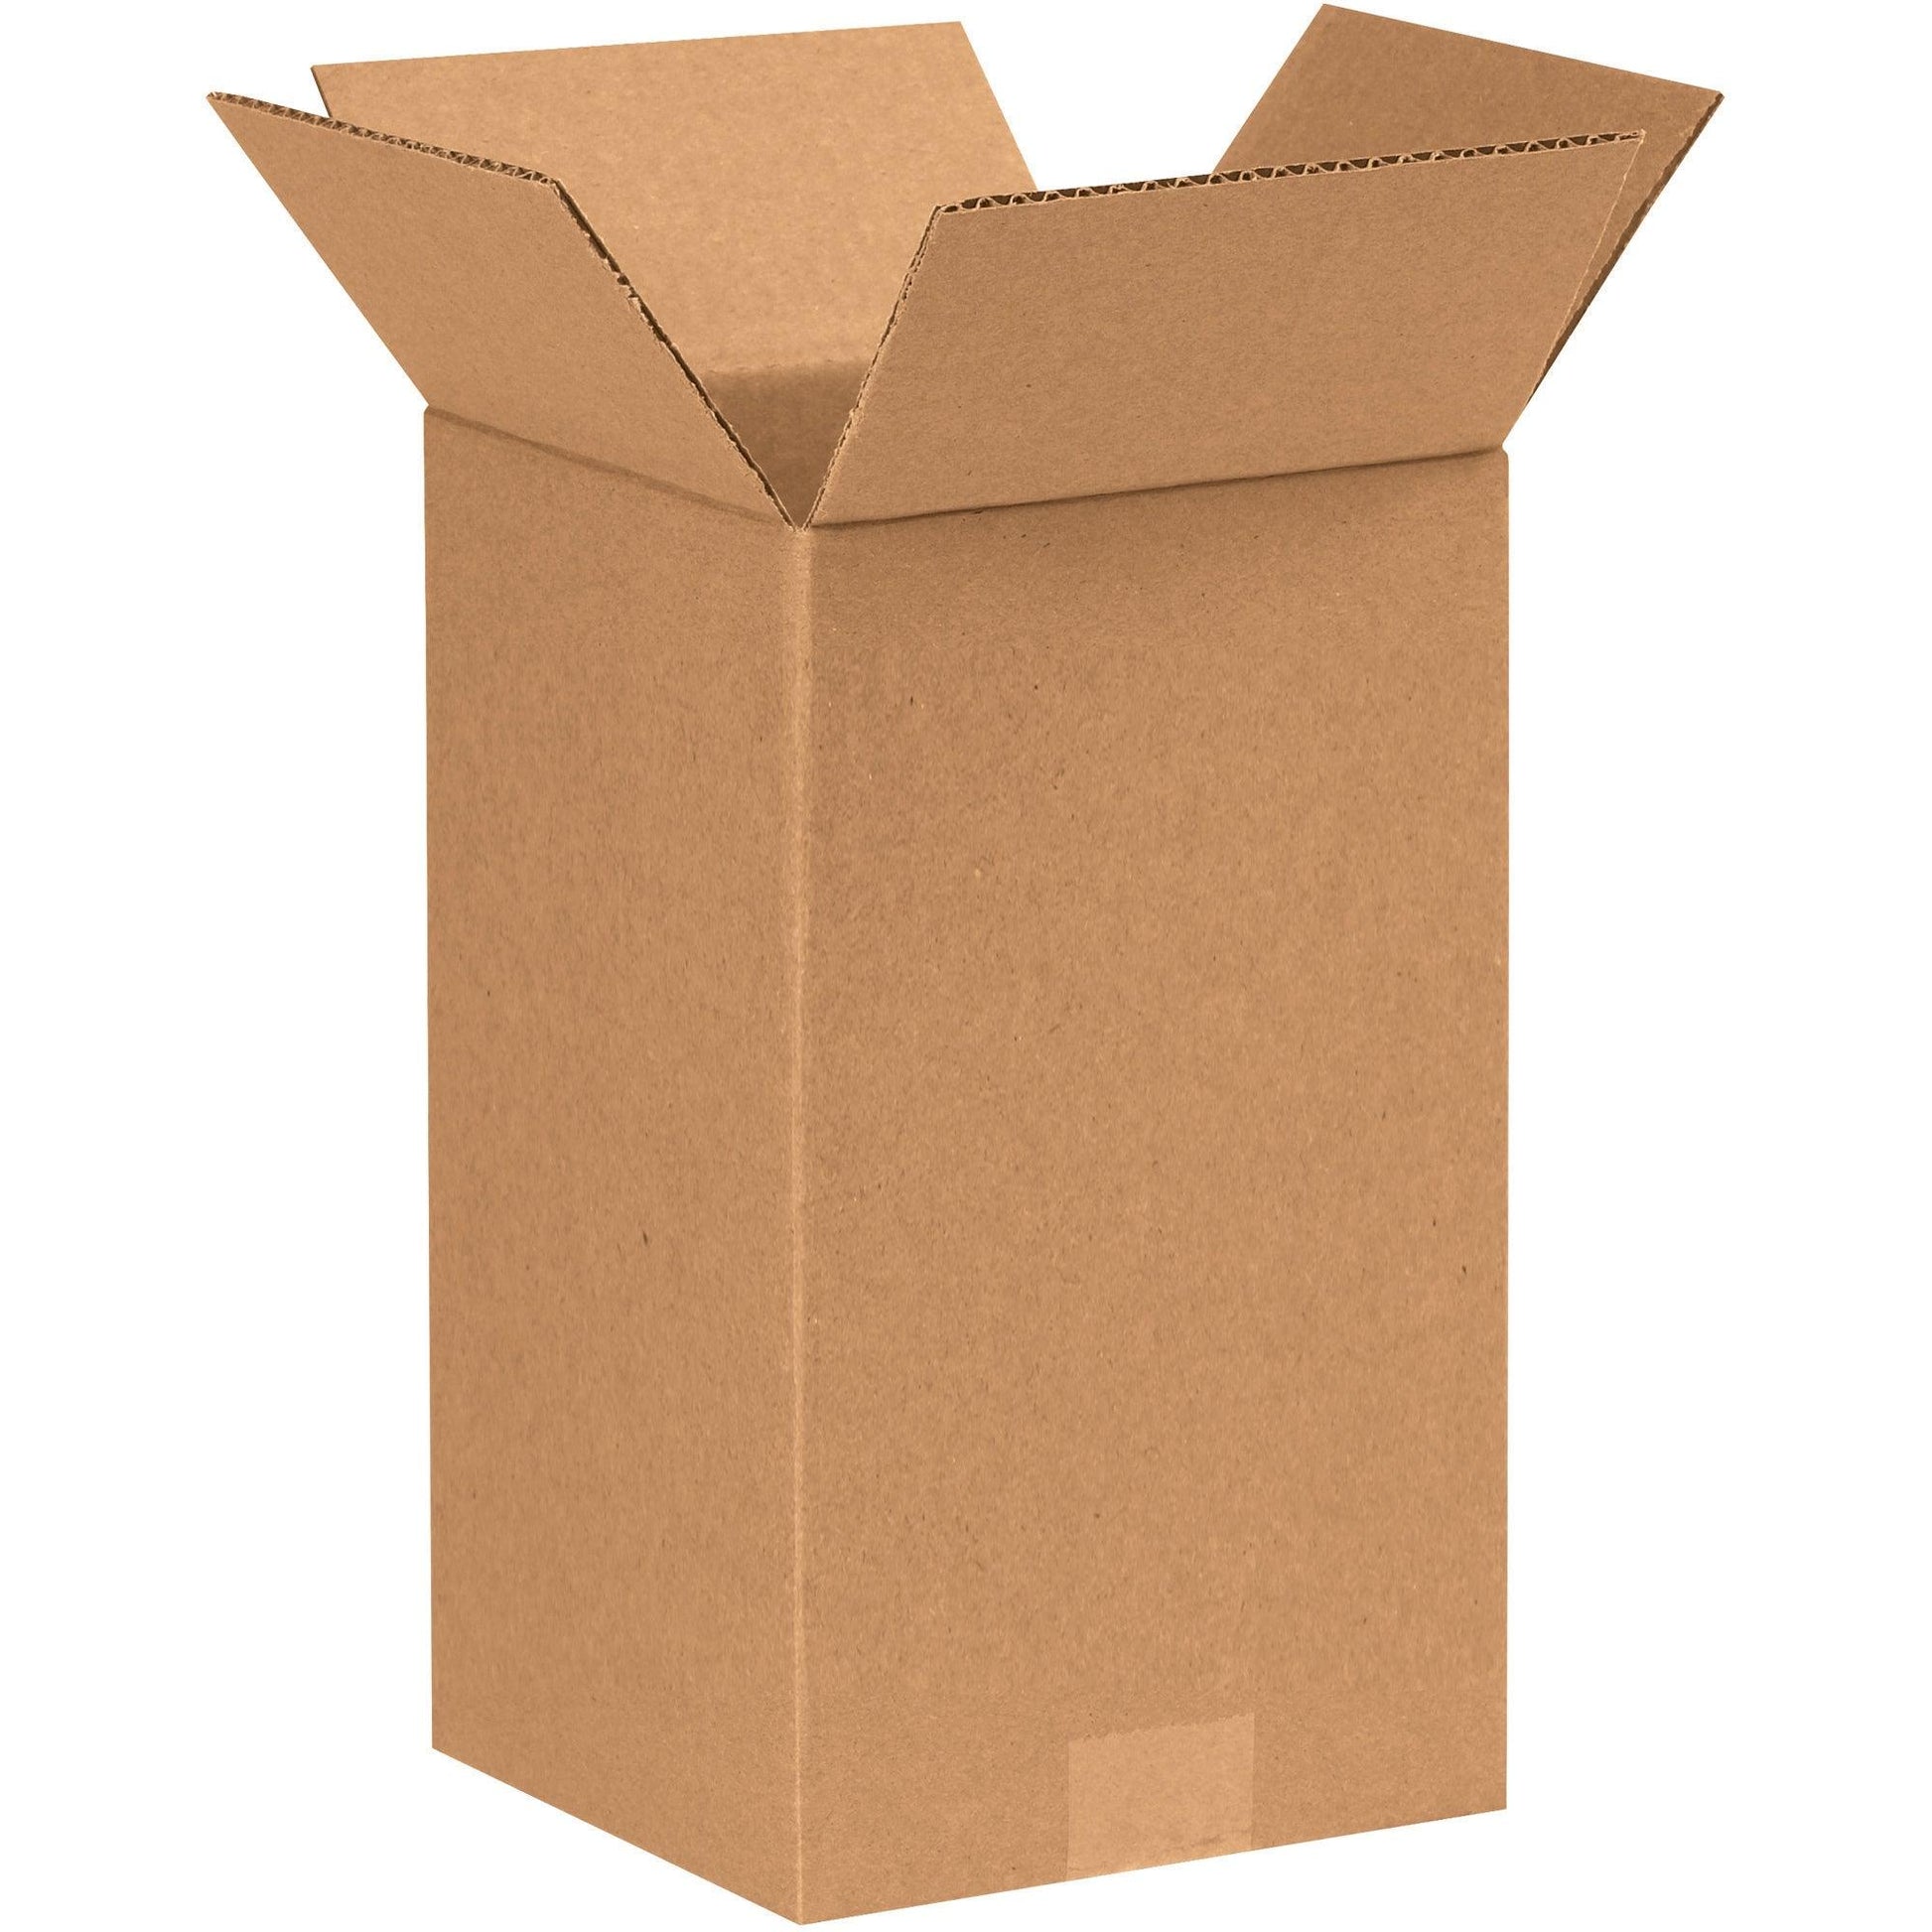 7 x 7 x 14" Tall Corrugated Boxes - 7714